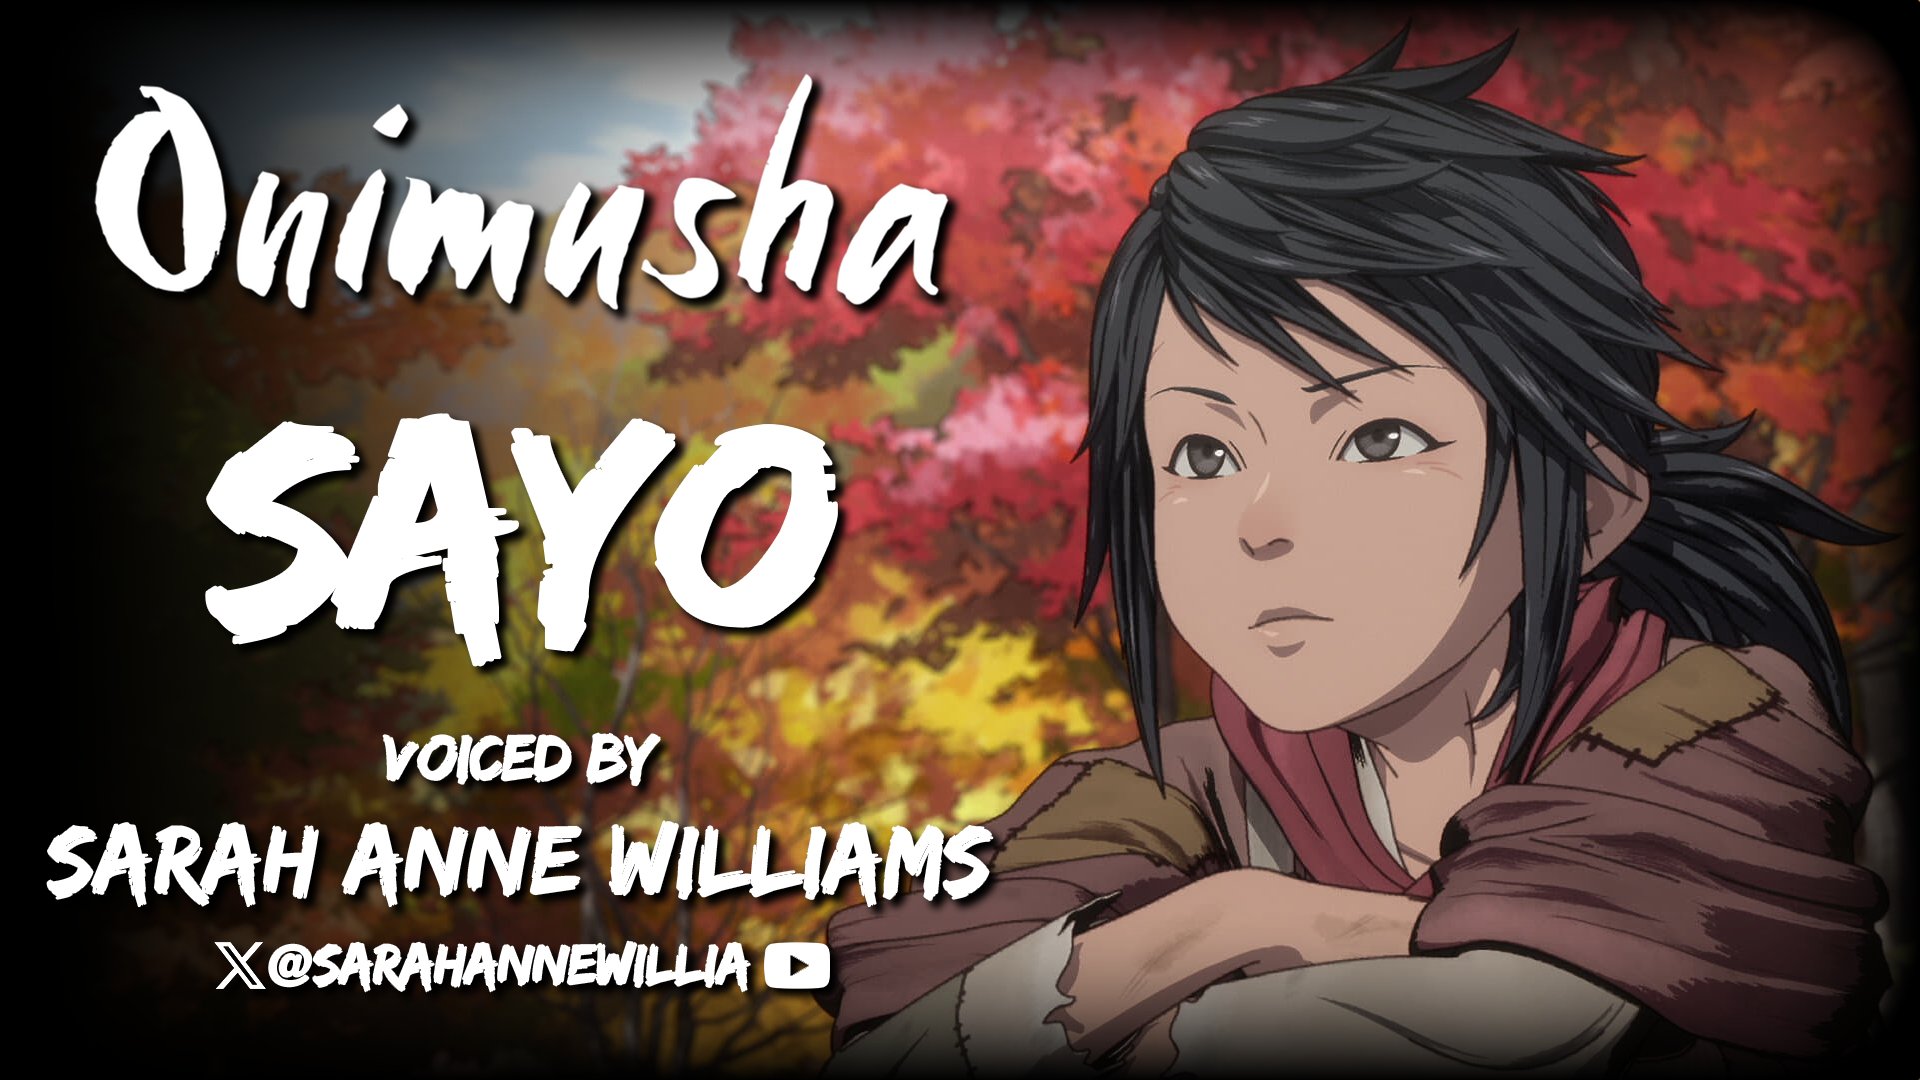 Sarah Anne Williams on X: I voice Sayo in the english dub of the Onimusha  anime, now streaming on #netflix! I loved, loved working on this (played  Onimusha on PS2 so many